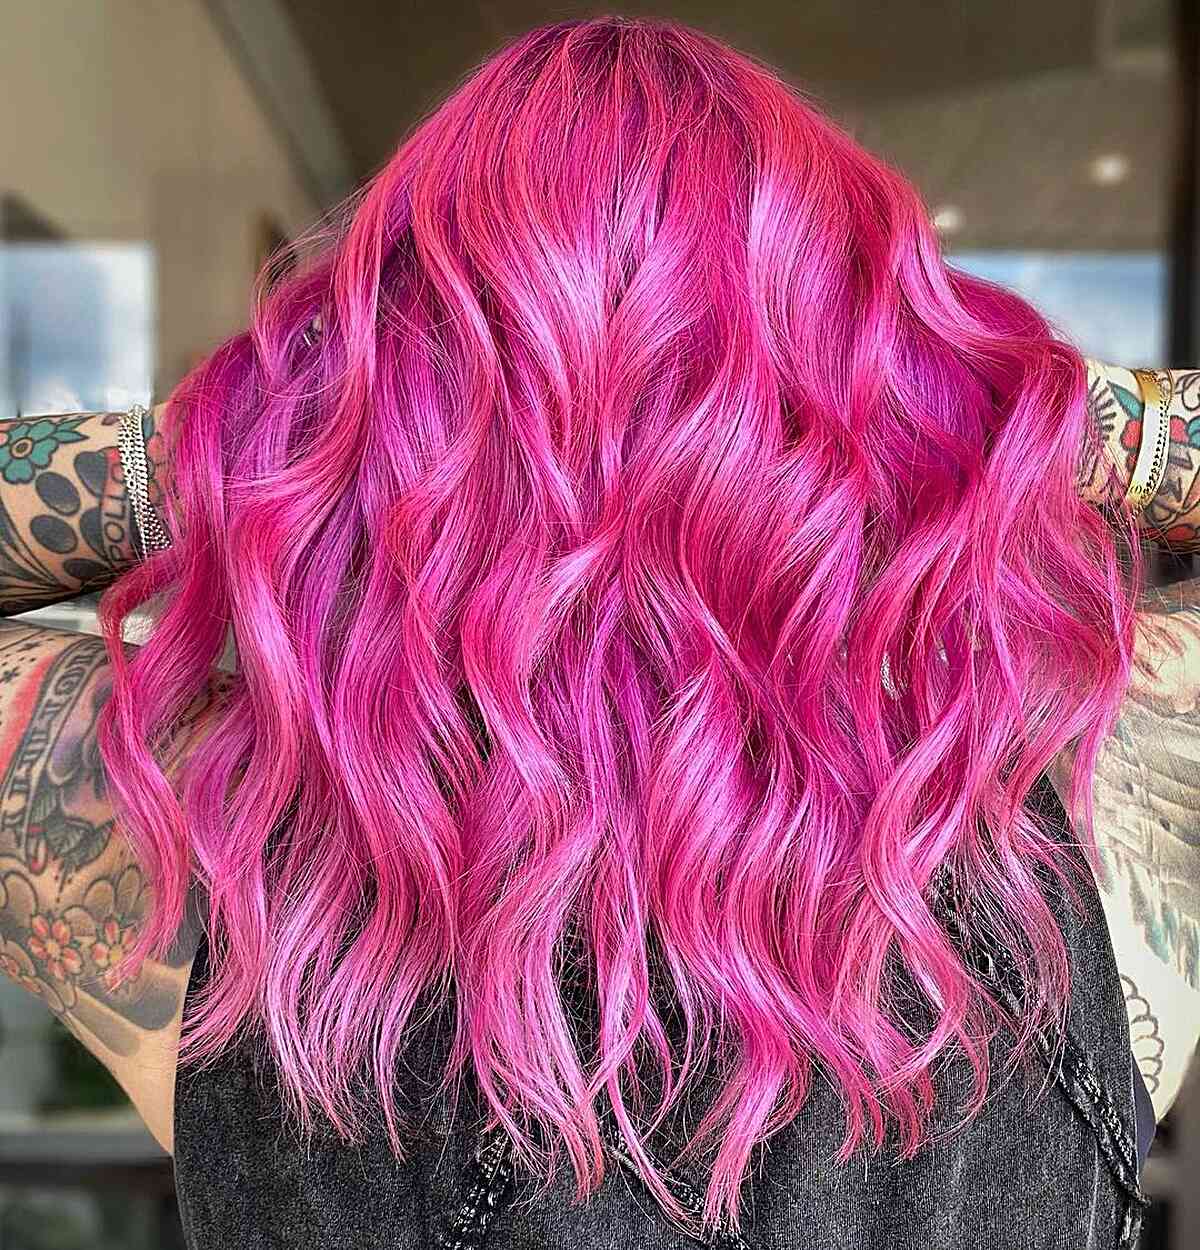 Bold and Vivid Hot Pink Hair Color for girls with an edgy style